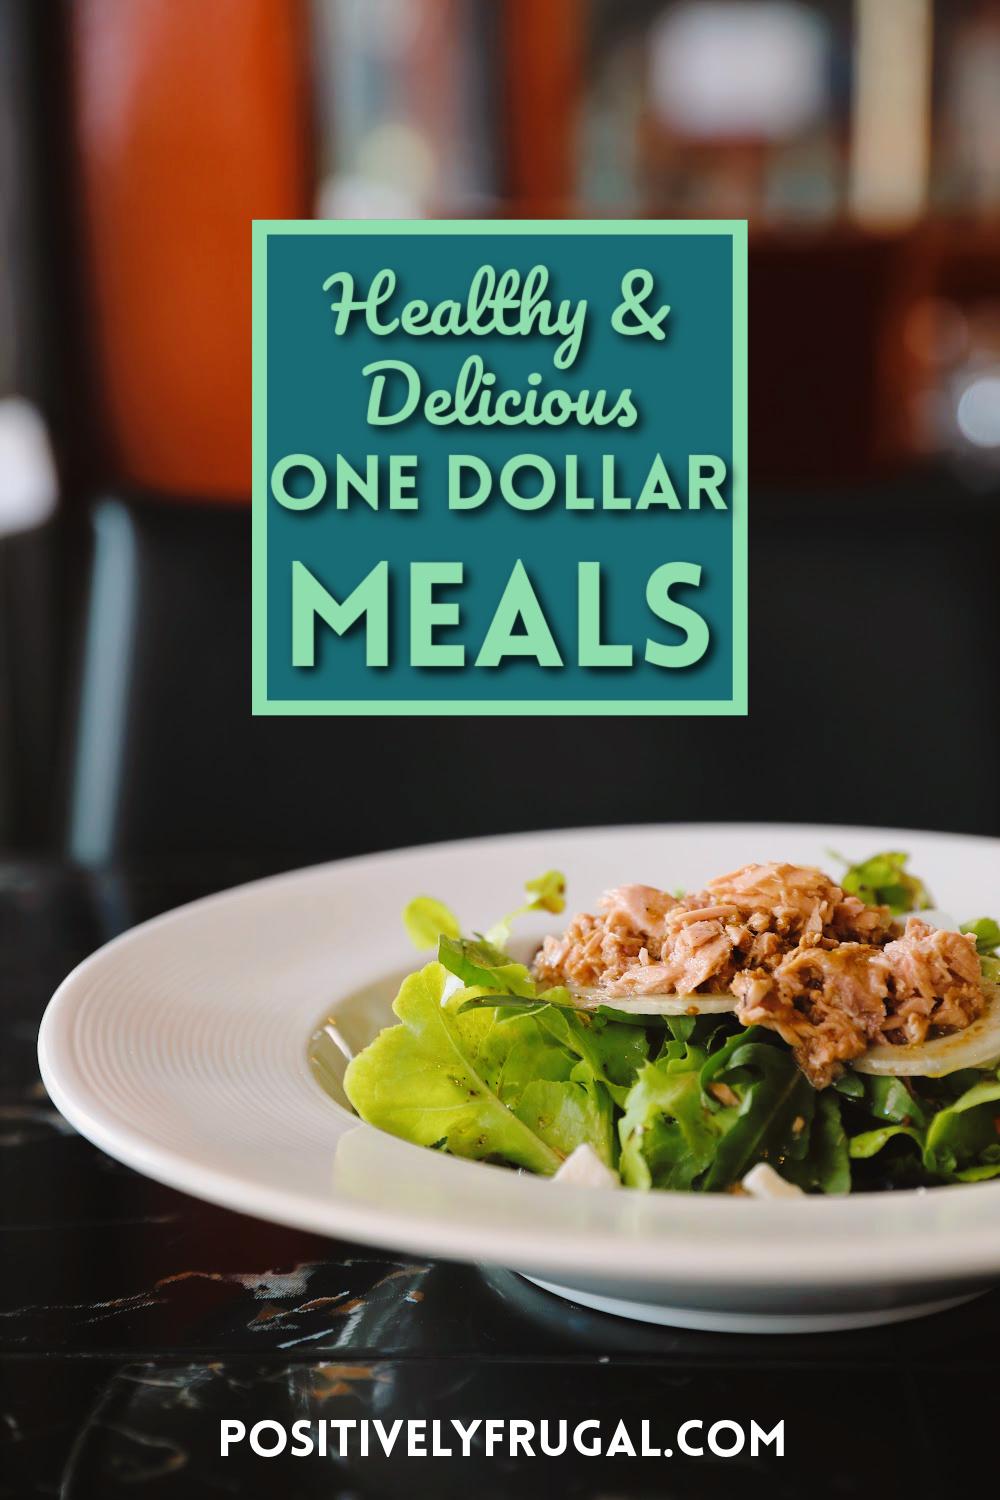 Healthy and Delicious One Dollar Meals by PositivelyFrugal.com